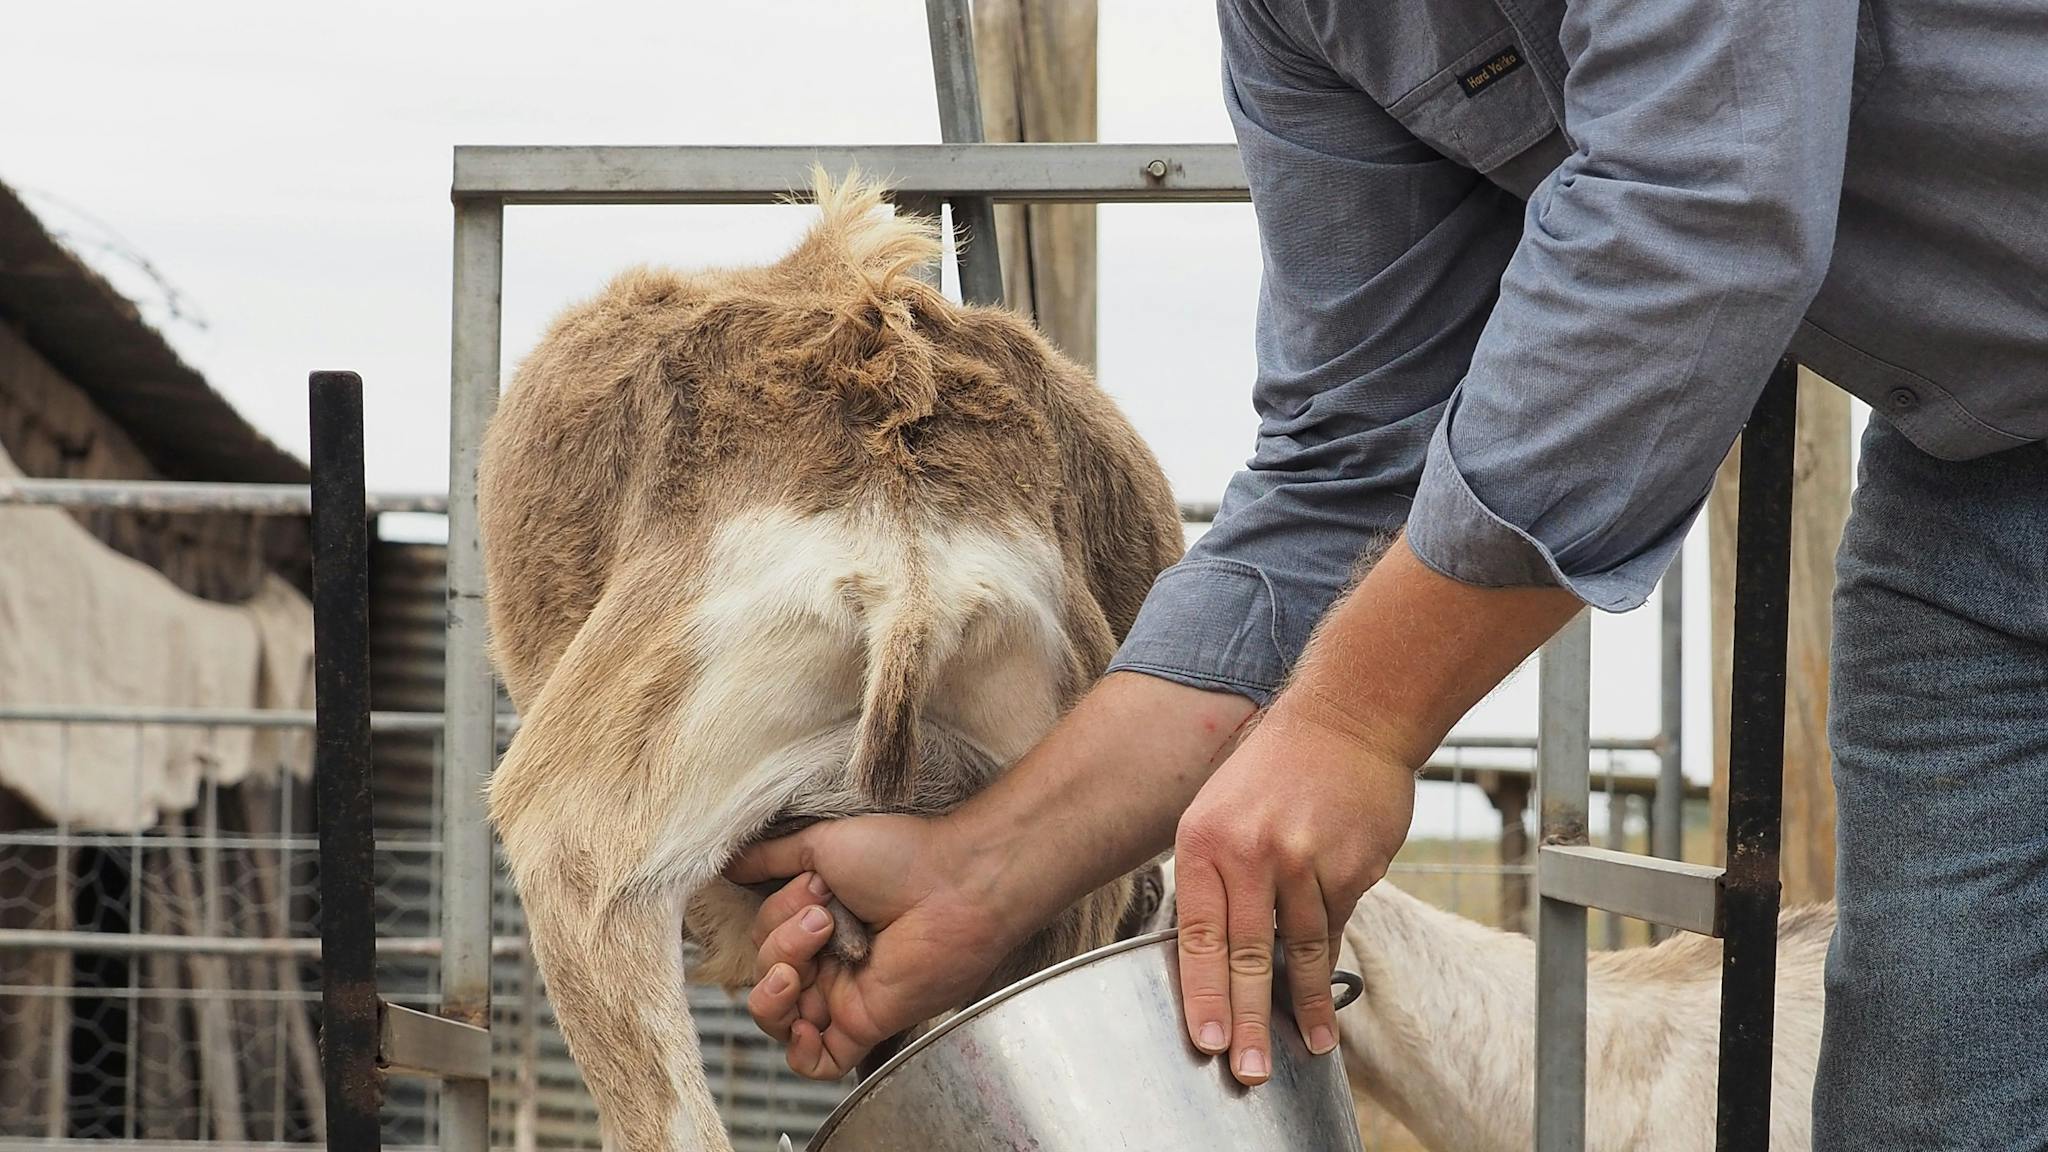 A goat being milked by hand.